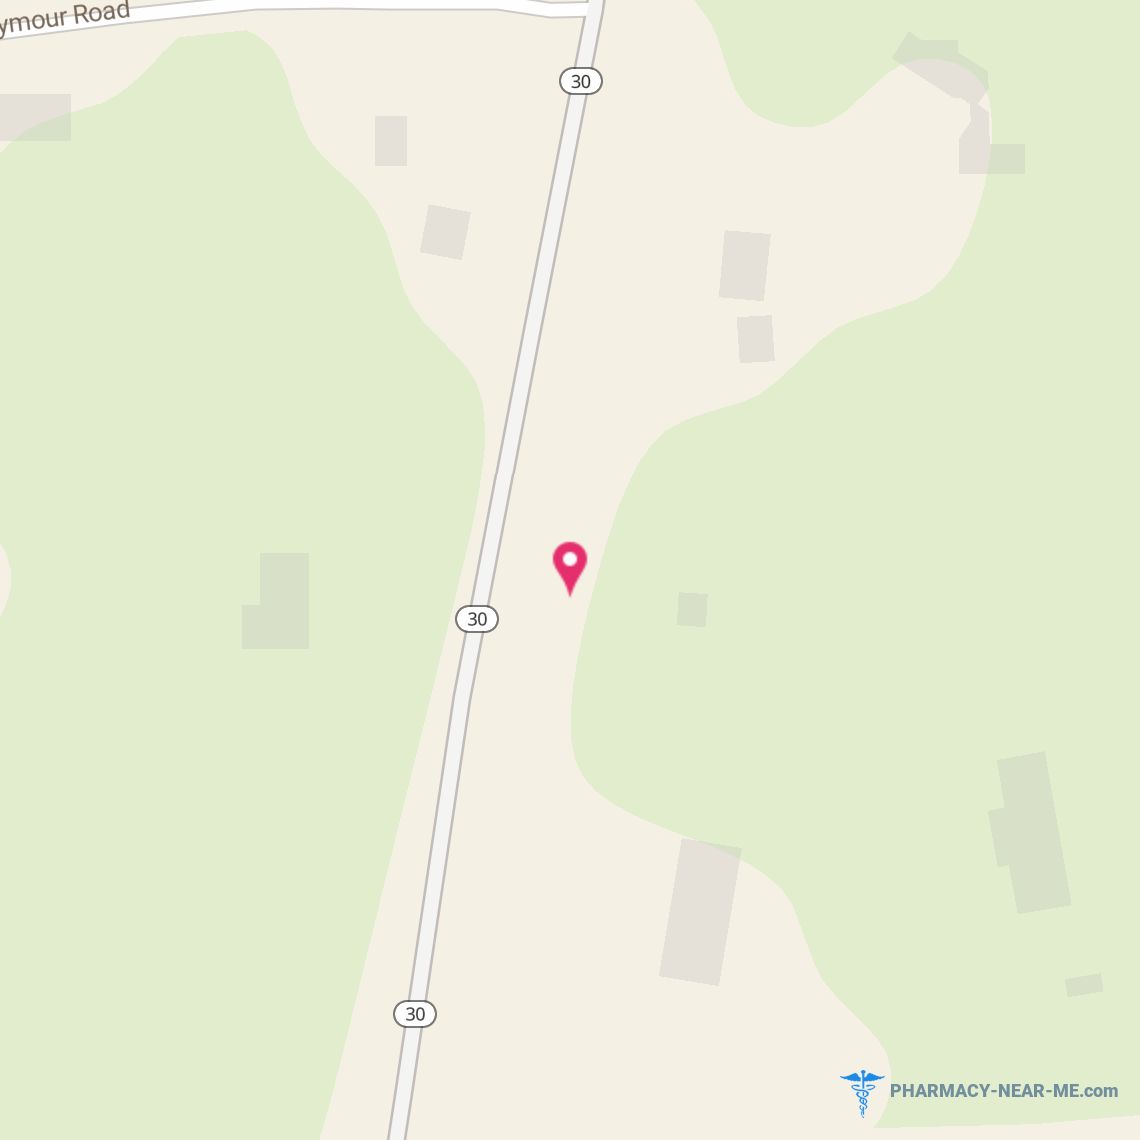 KINNEY DRUGS #98 - Pharmacy Hours, Phone, Reviews & Information: Vermont Route 30 North, Castleton, Vermont 05732, United States